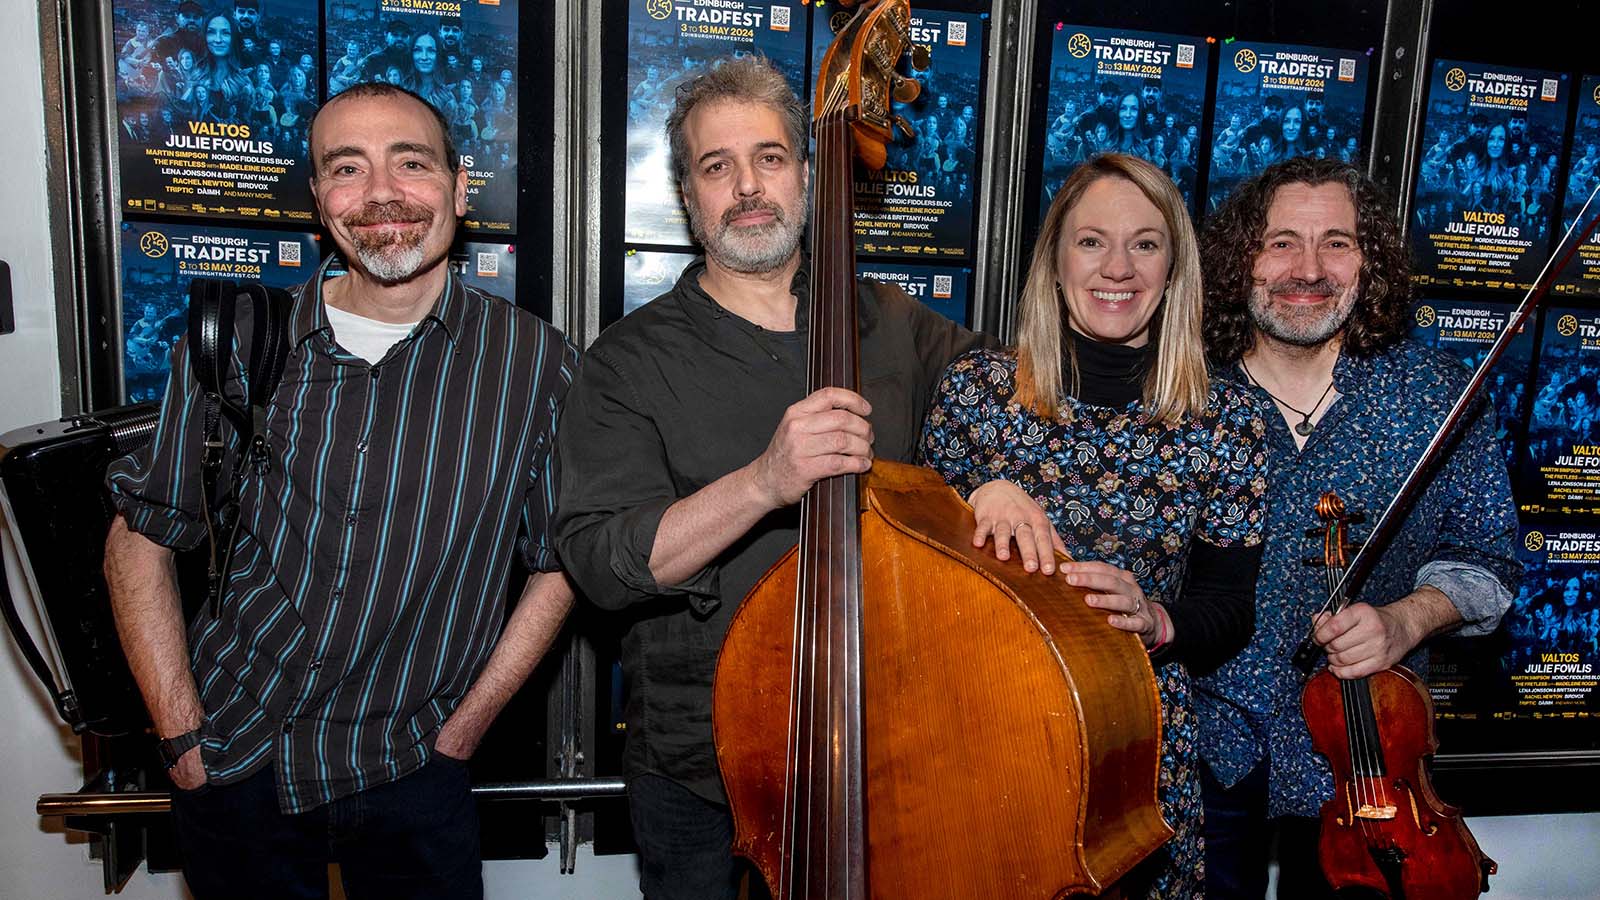 Four people - three man with instruments and a woman - pictured together in front of a wall of posters for Edinburgh tradfest